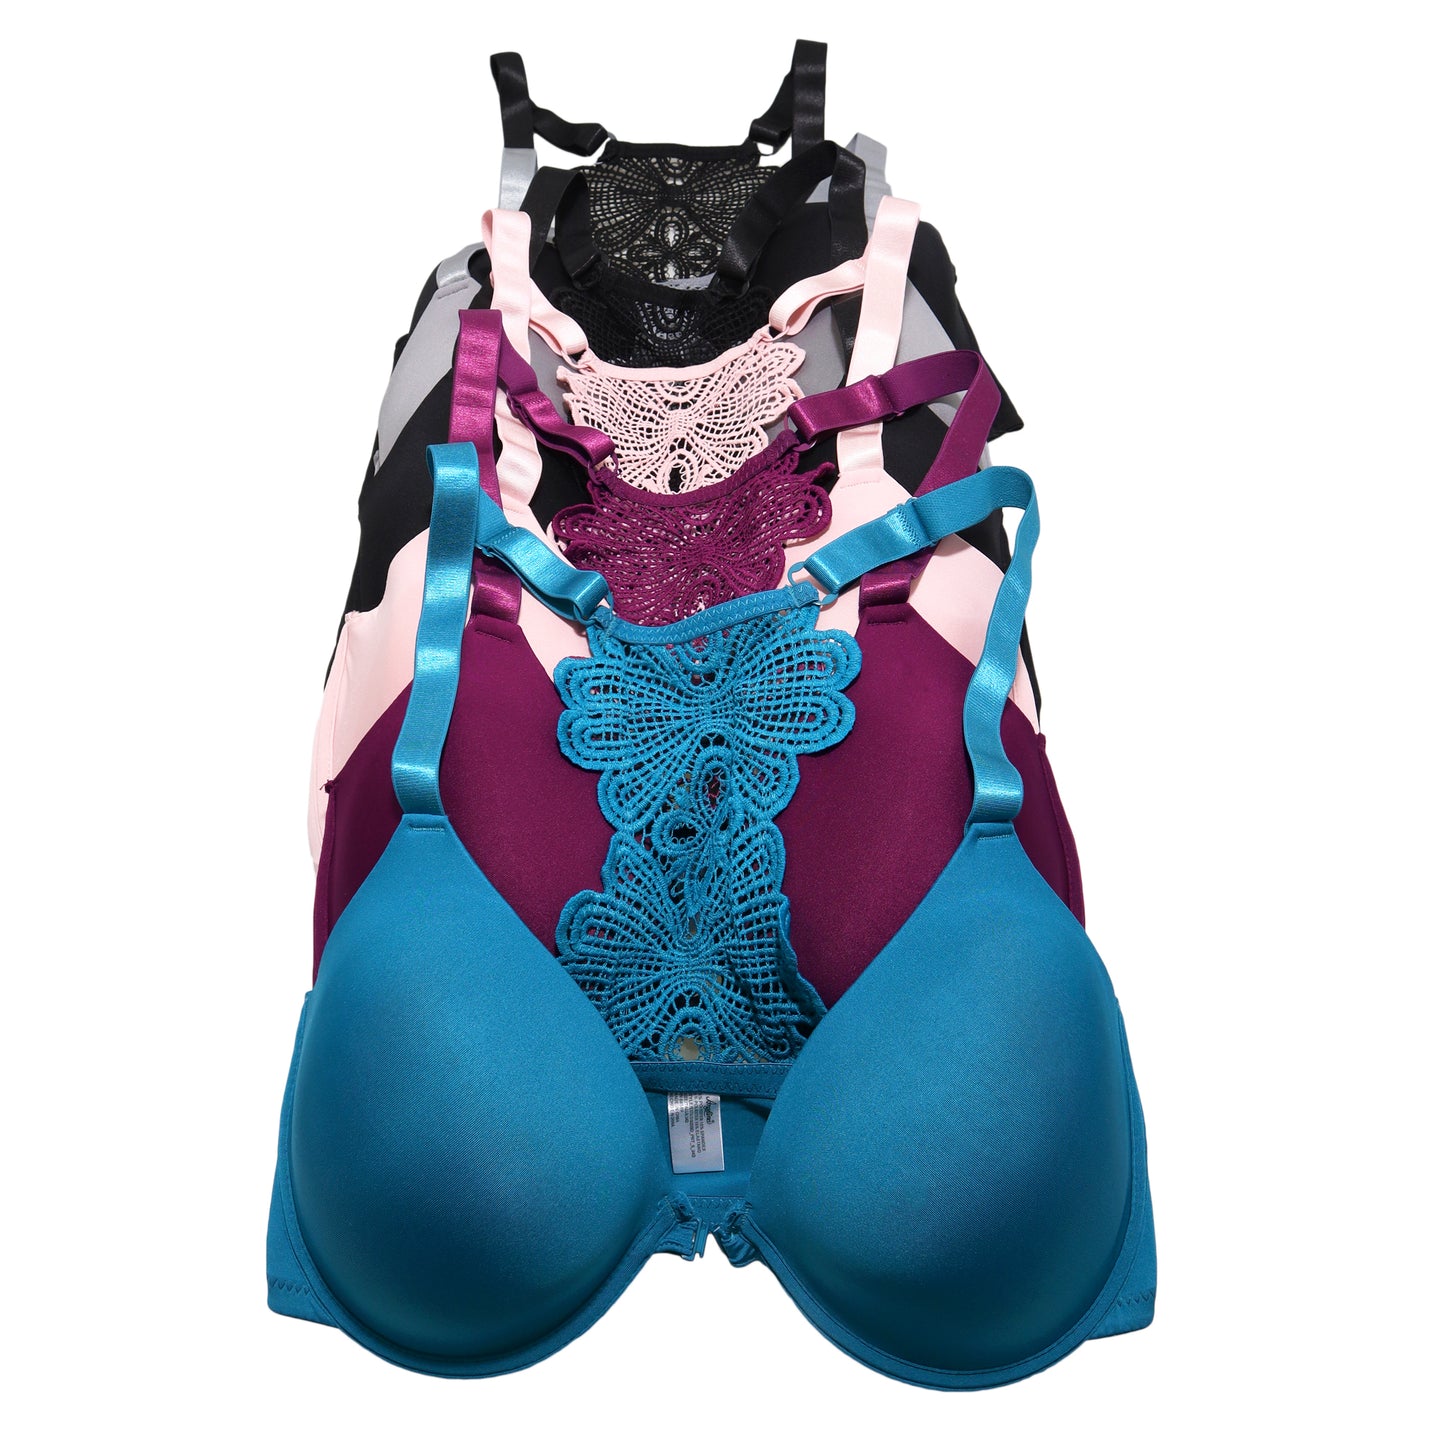 Wired, Padded Extended Size Bras with Butterfly Back Design (6-Pack)